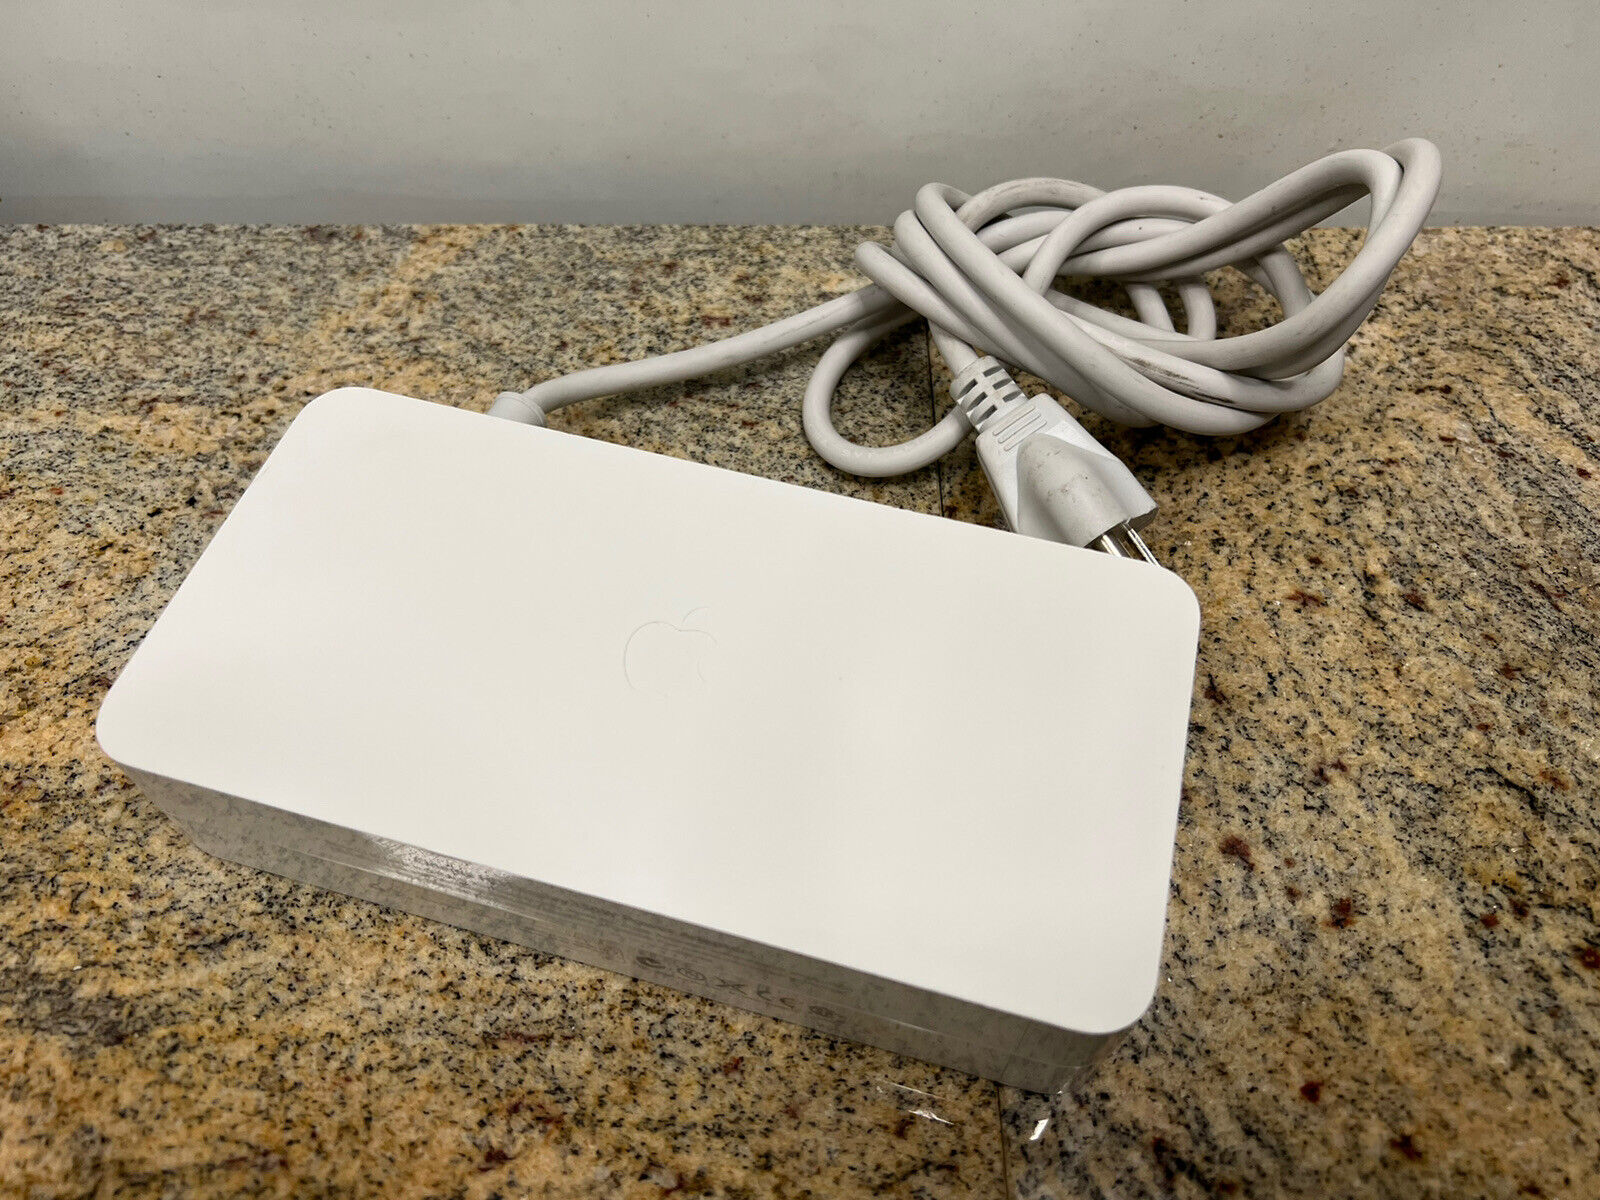 Apple A1098 White 24.5-Volt 6.1-A 150W Cinema HD Display Power Adapter - TESTED